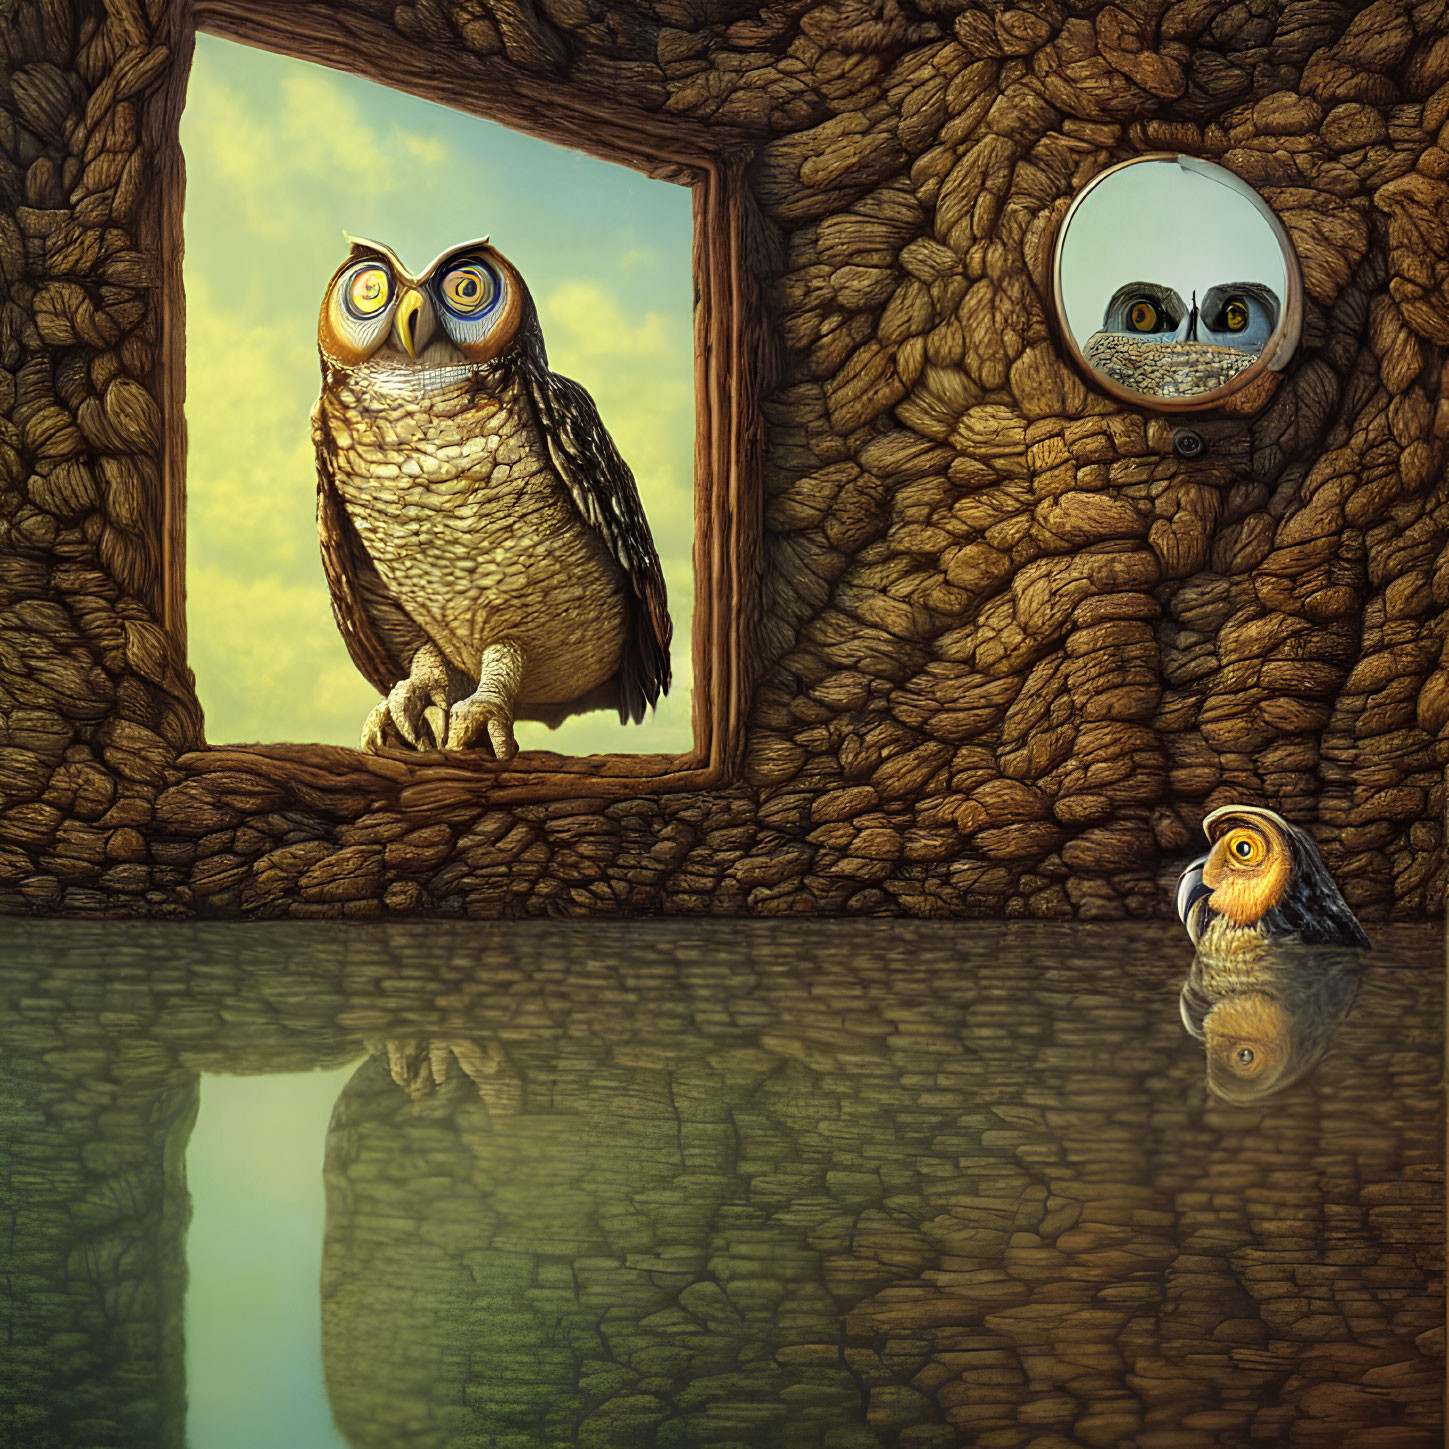 Owl perches beside reflection in stone room mirror